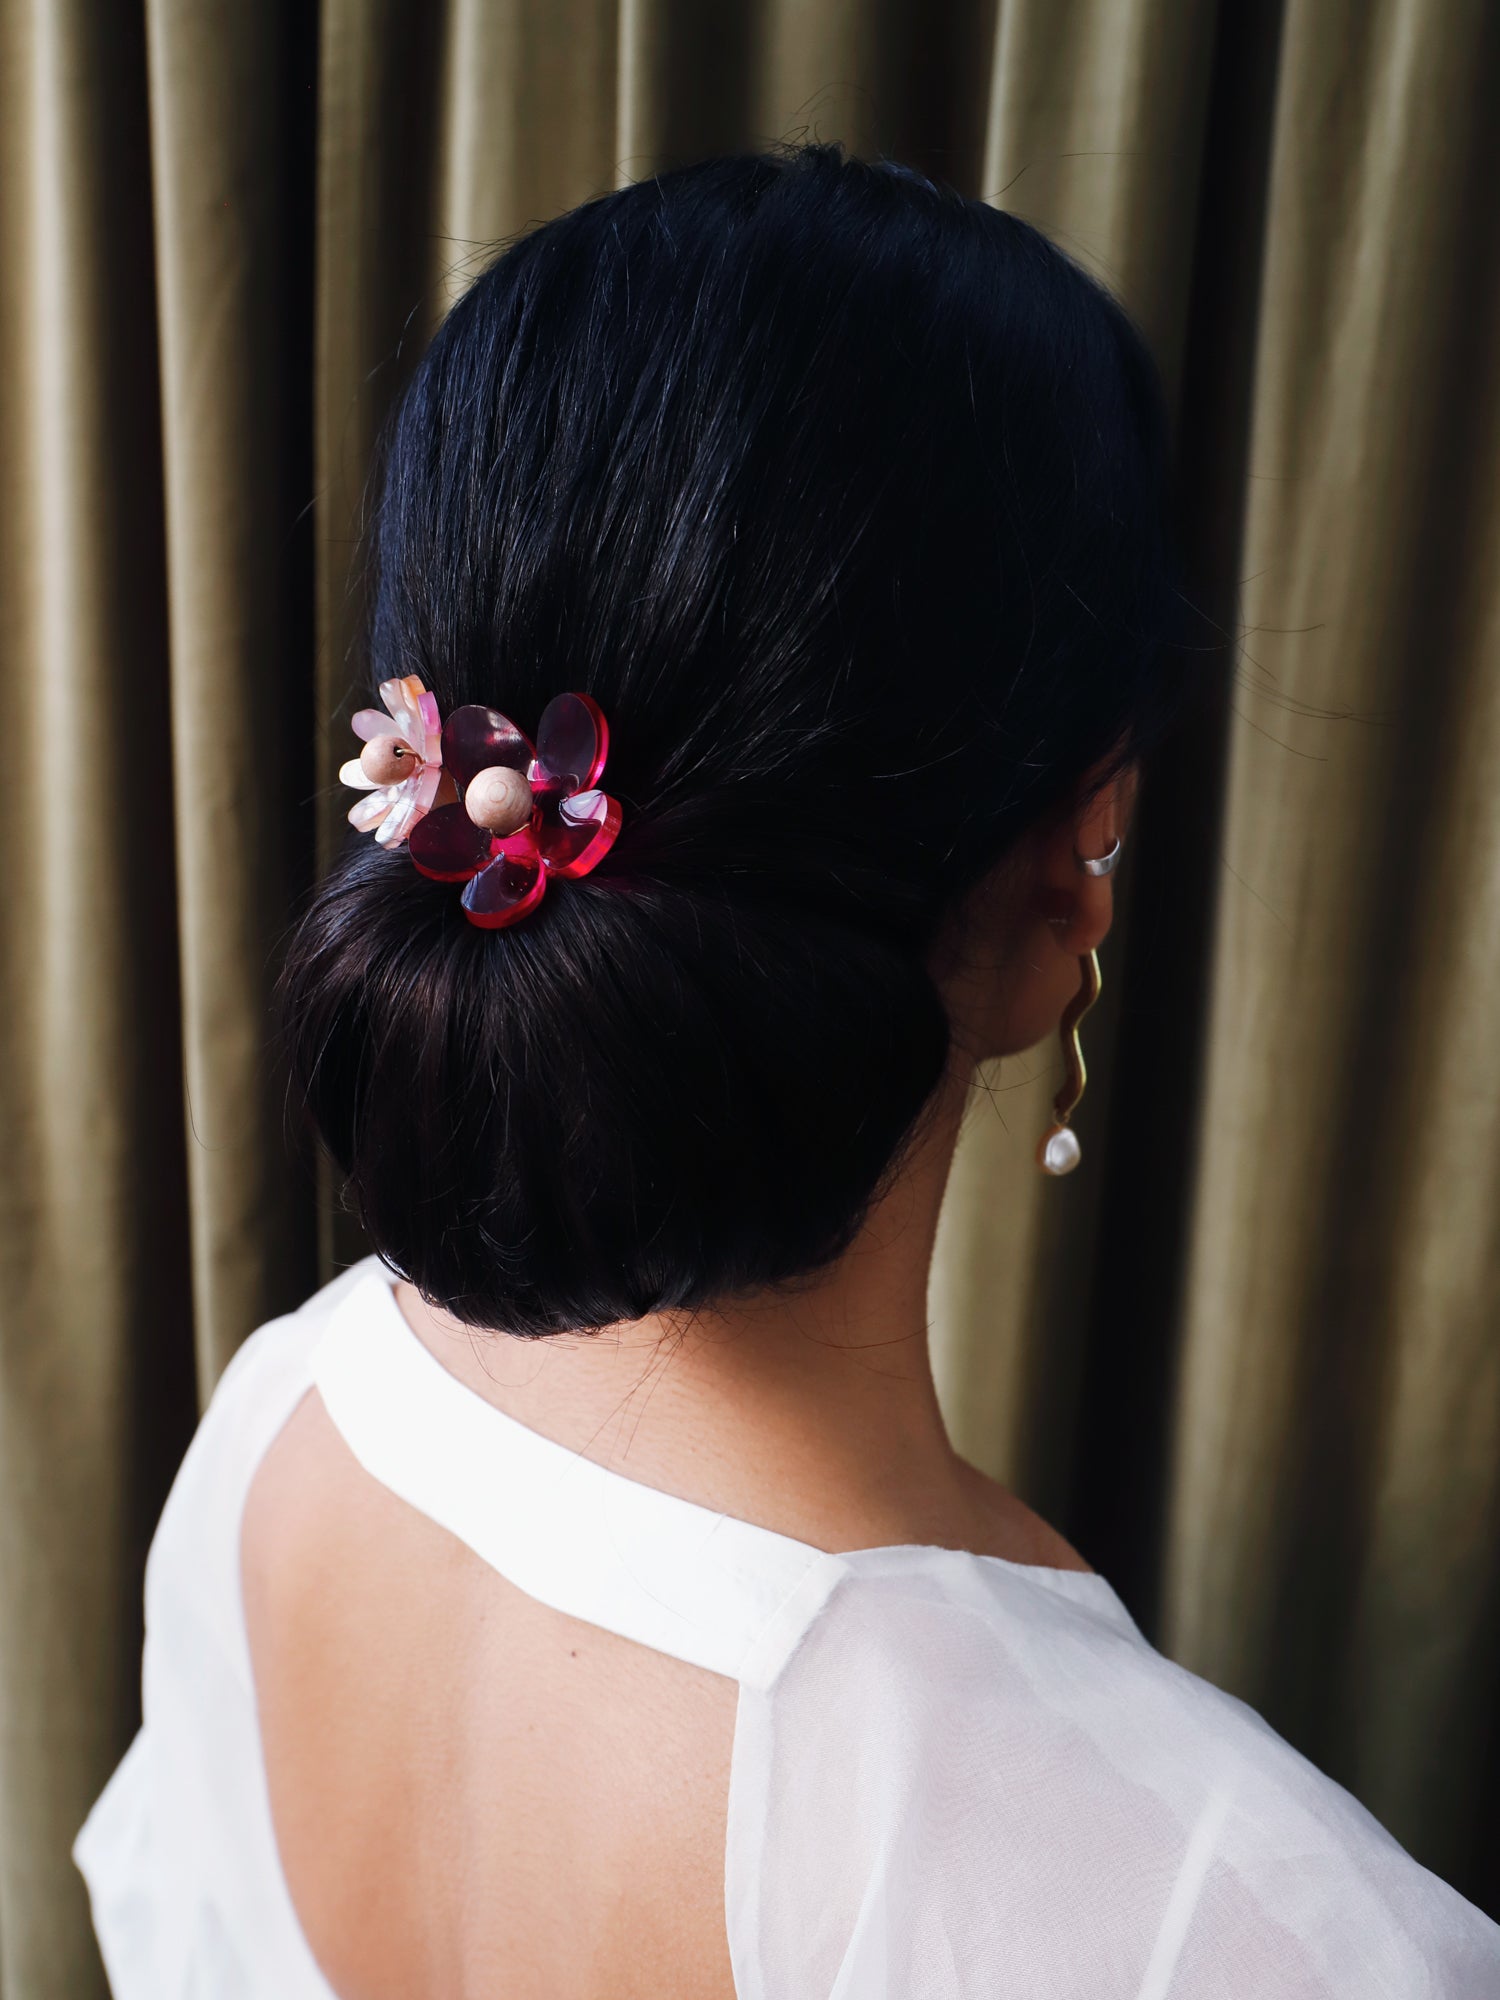 Blossom Hair Comb